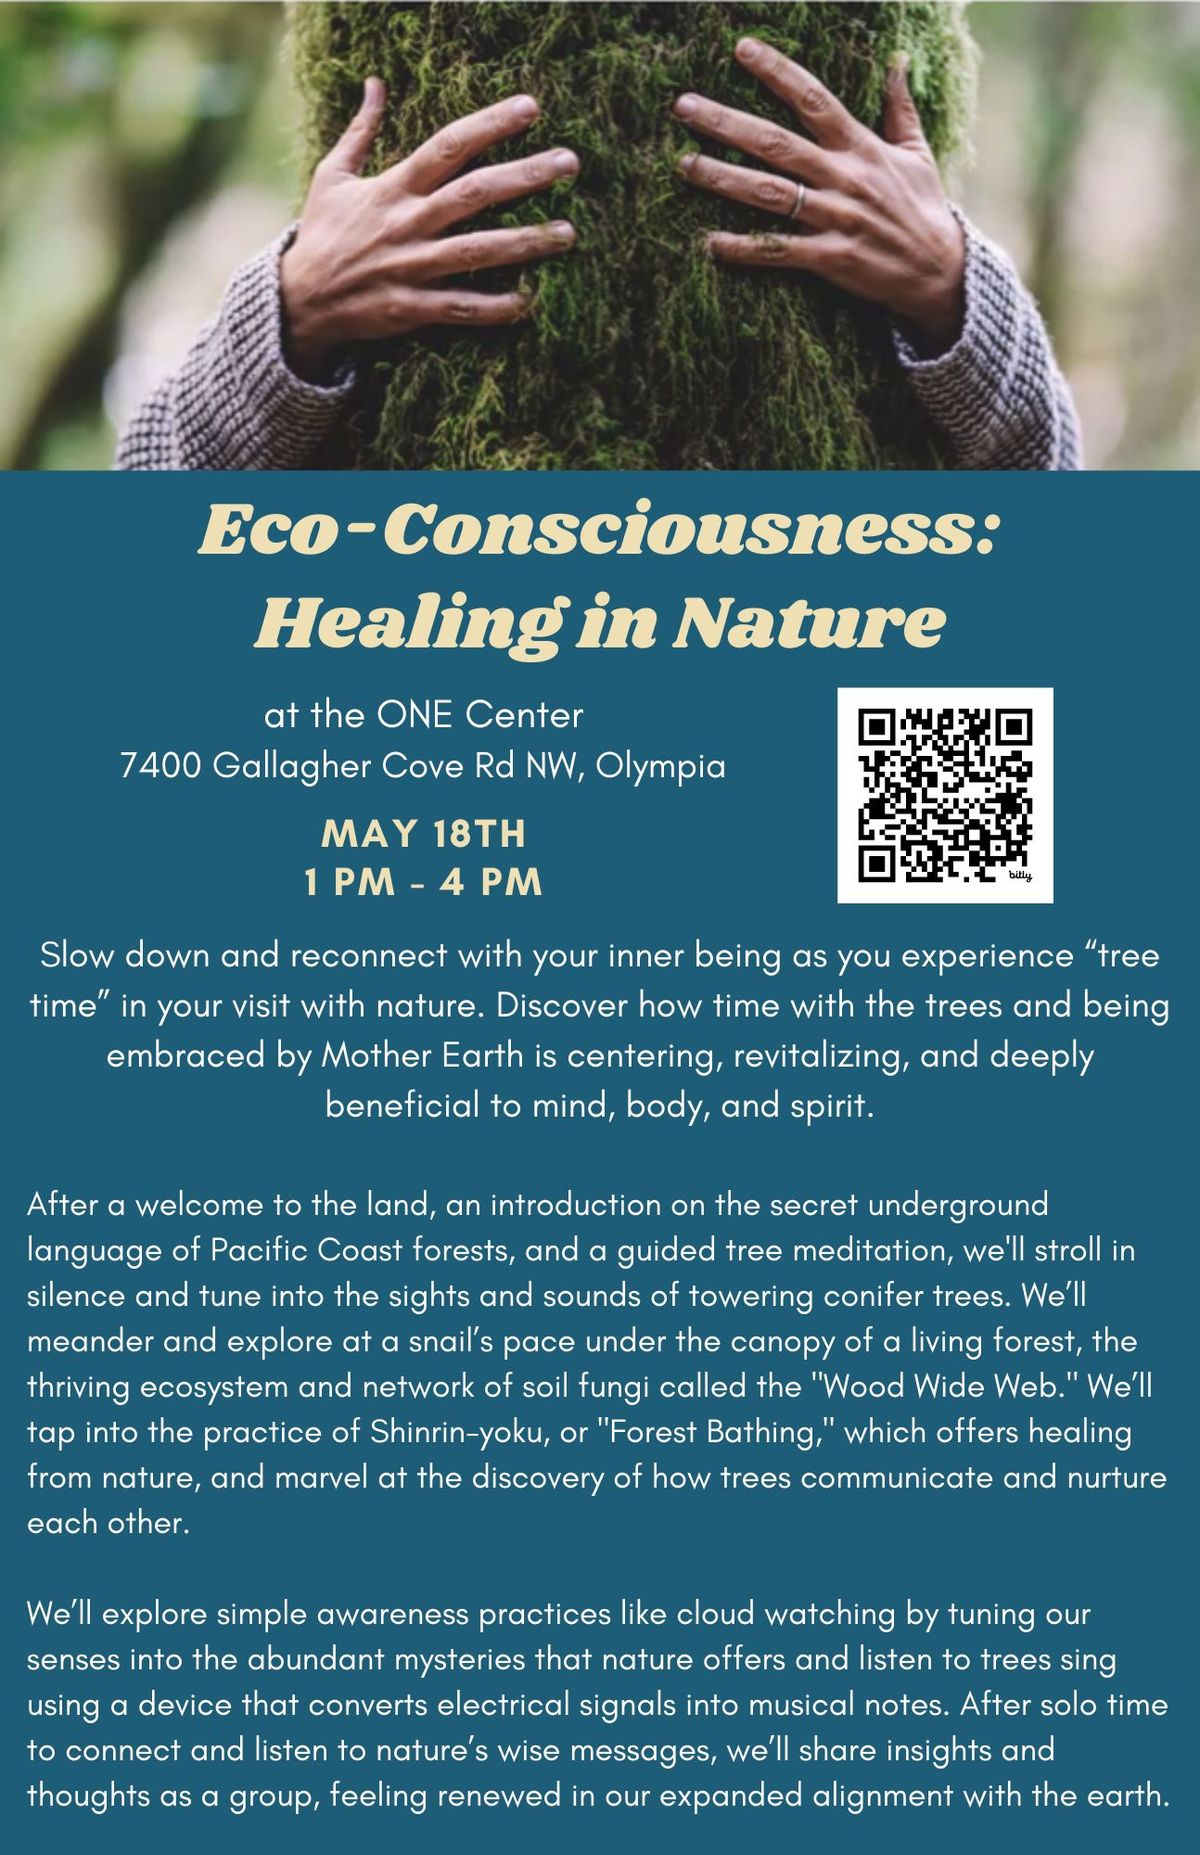 Eco-Consciousness: Healing in Nature